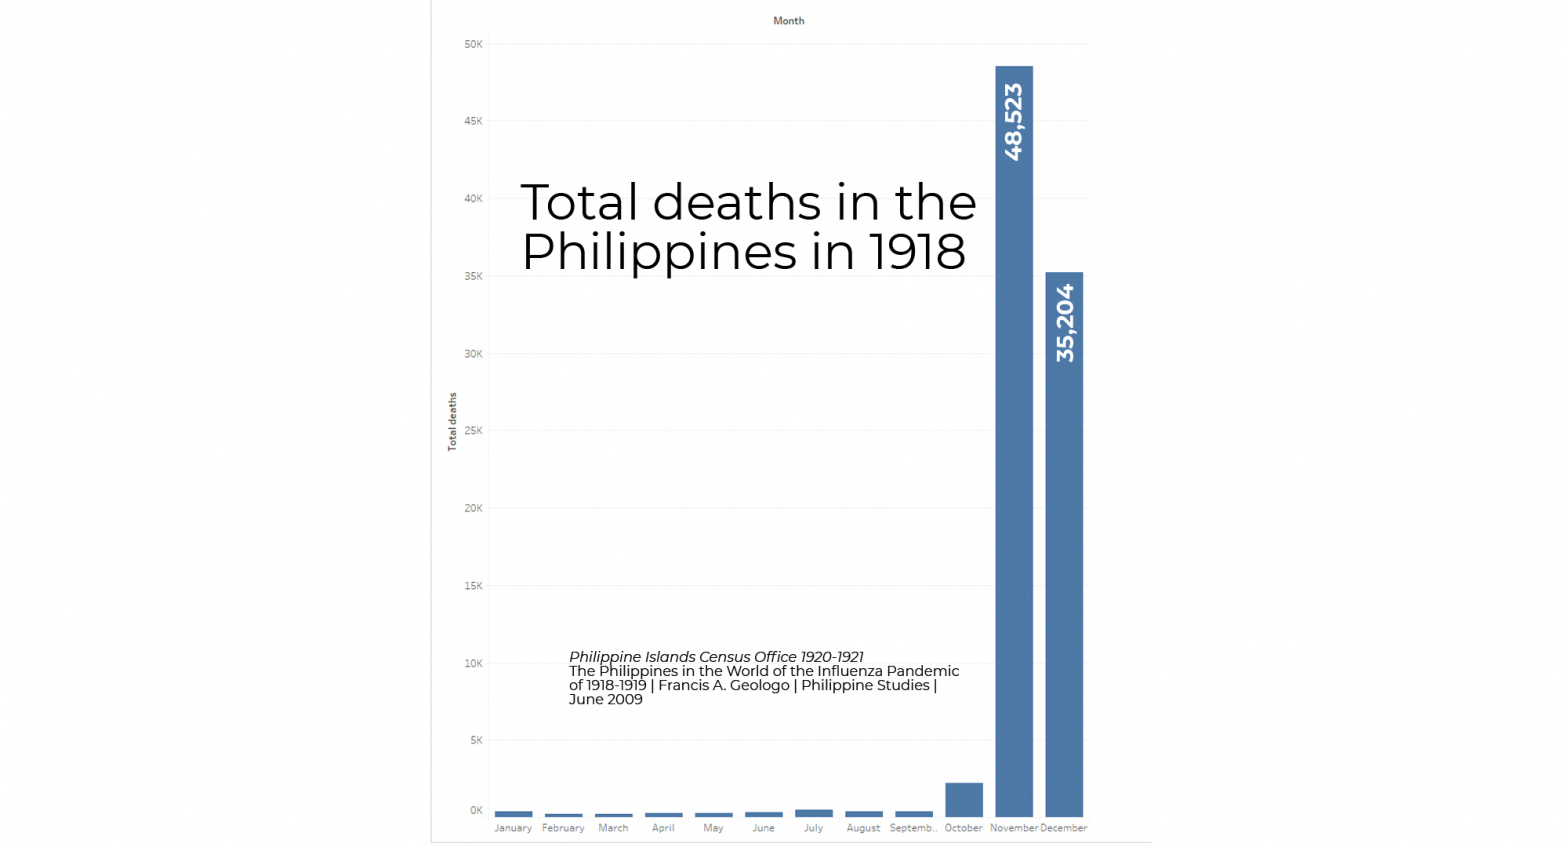 1918-1919 influenza pandemic: the 2nd wave was a tsunami of deaths